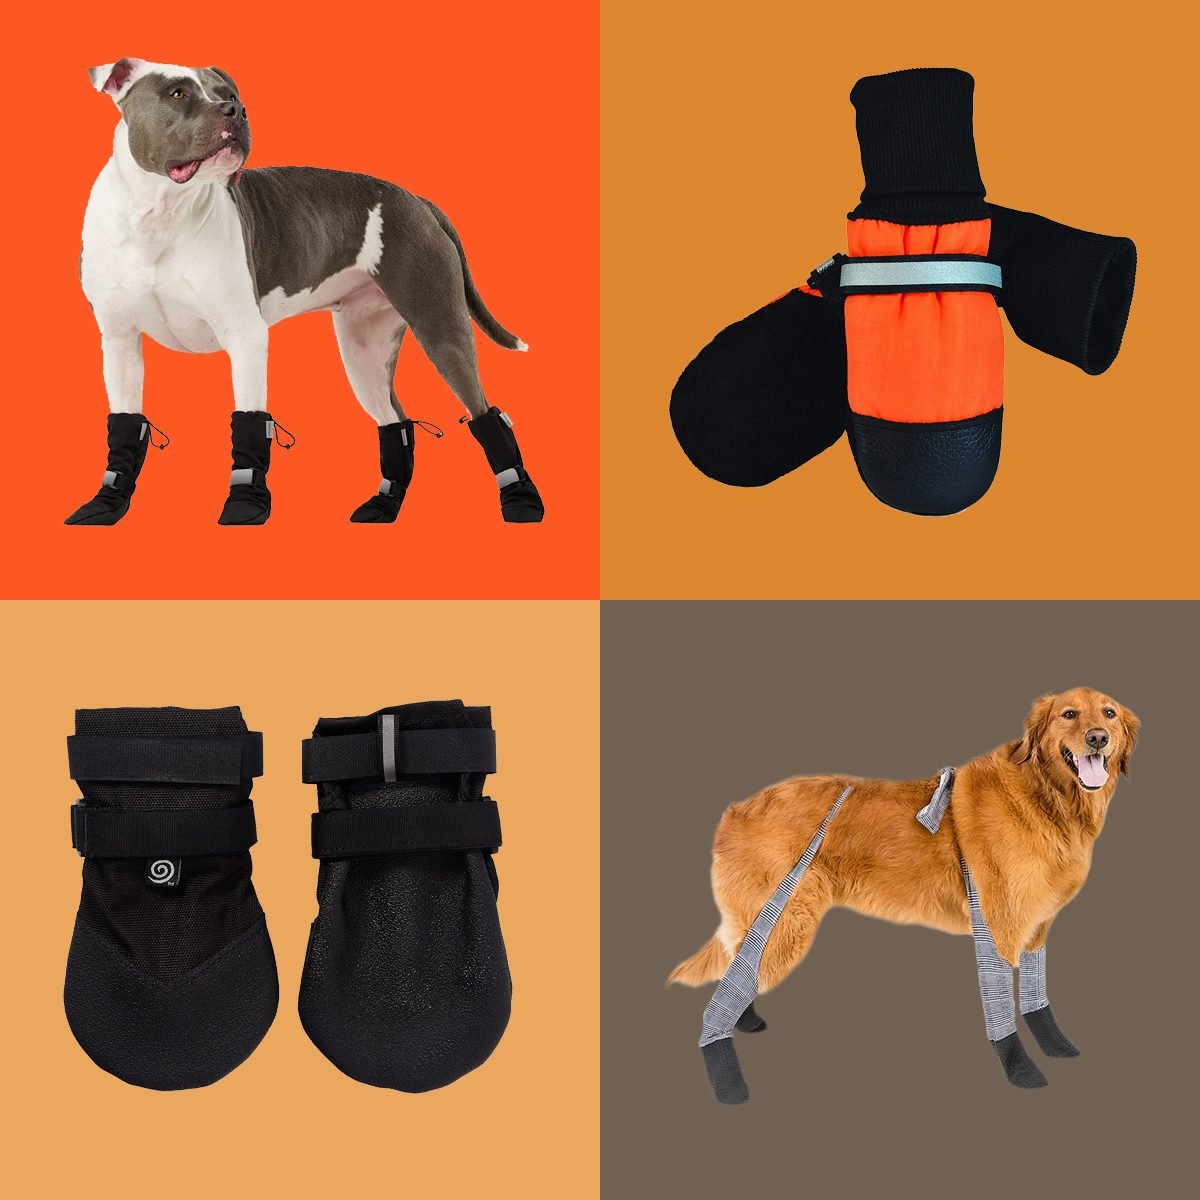 Walkee Paws Dog Boot Leggings - Adjustable, Secure Fit - Protects from  Weather, Allergens & Chemicals - Non-Slip Traction - Comfortable Materials  